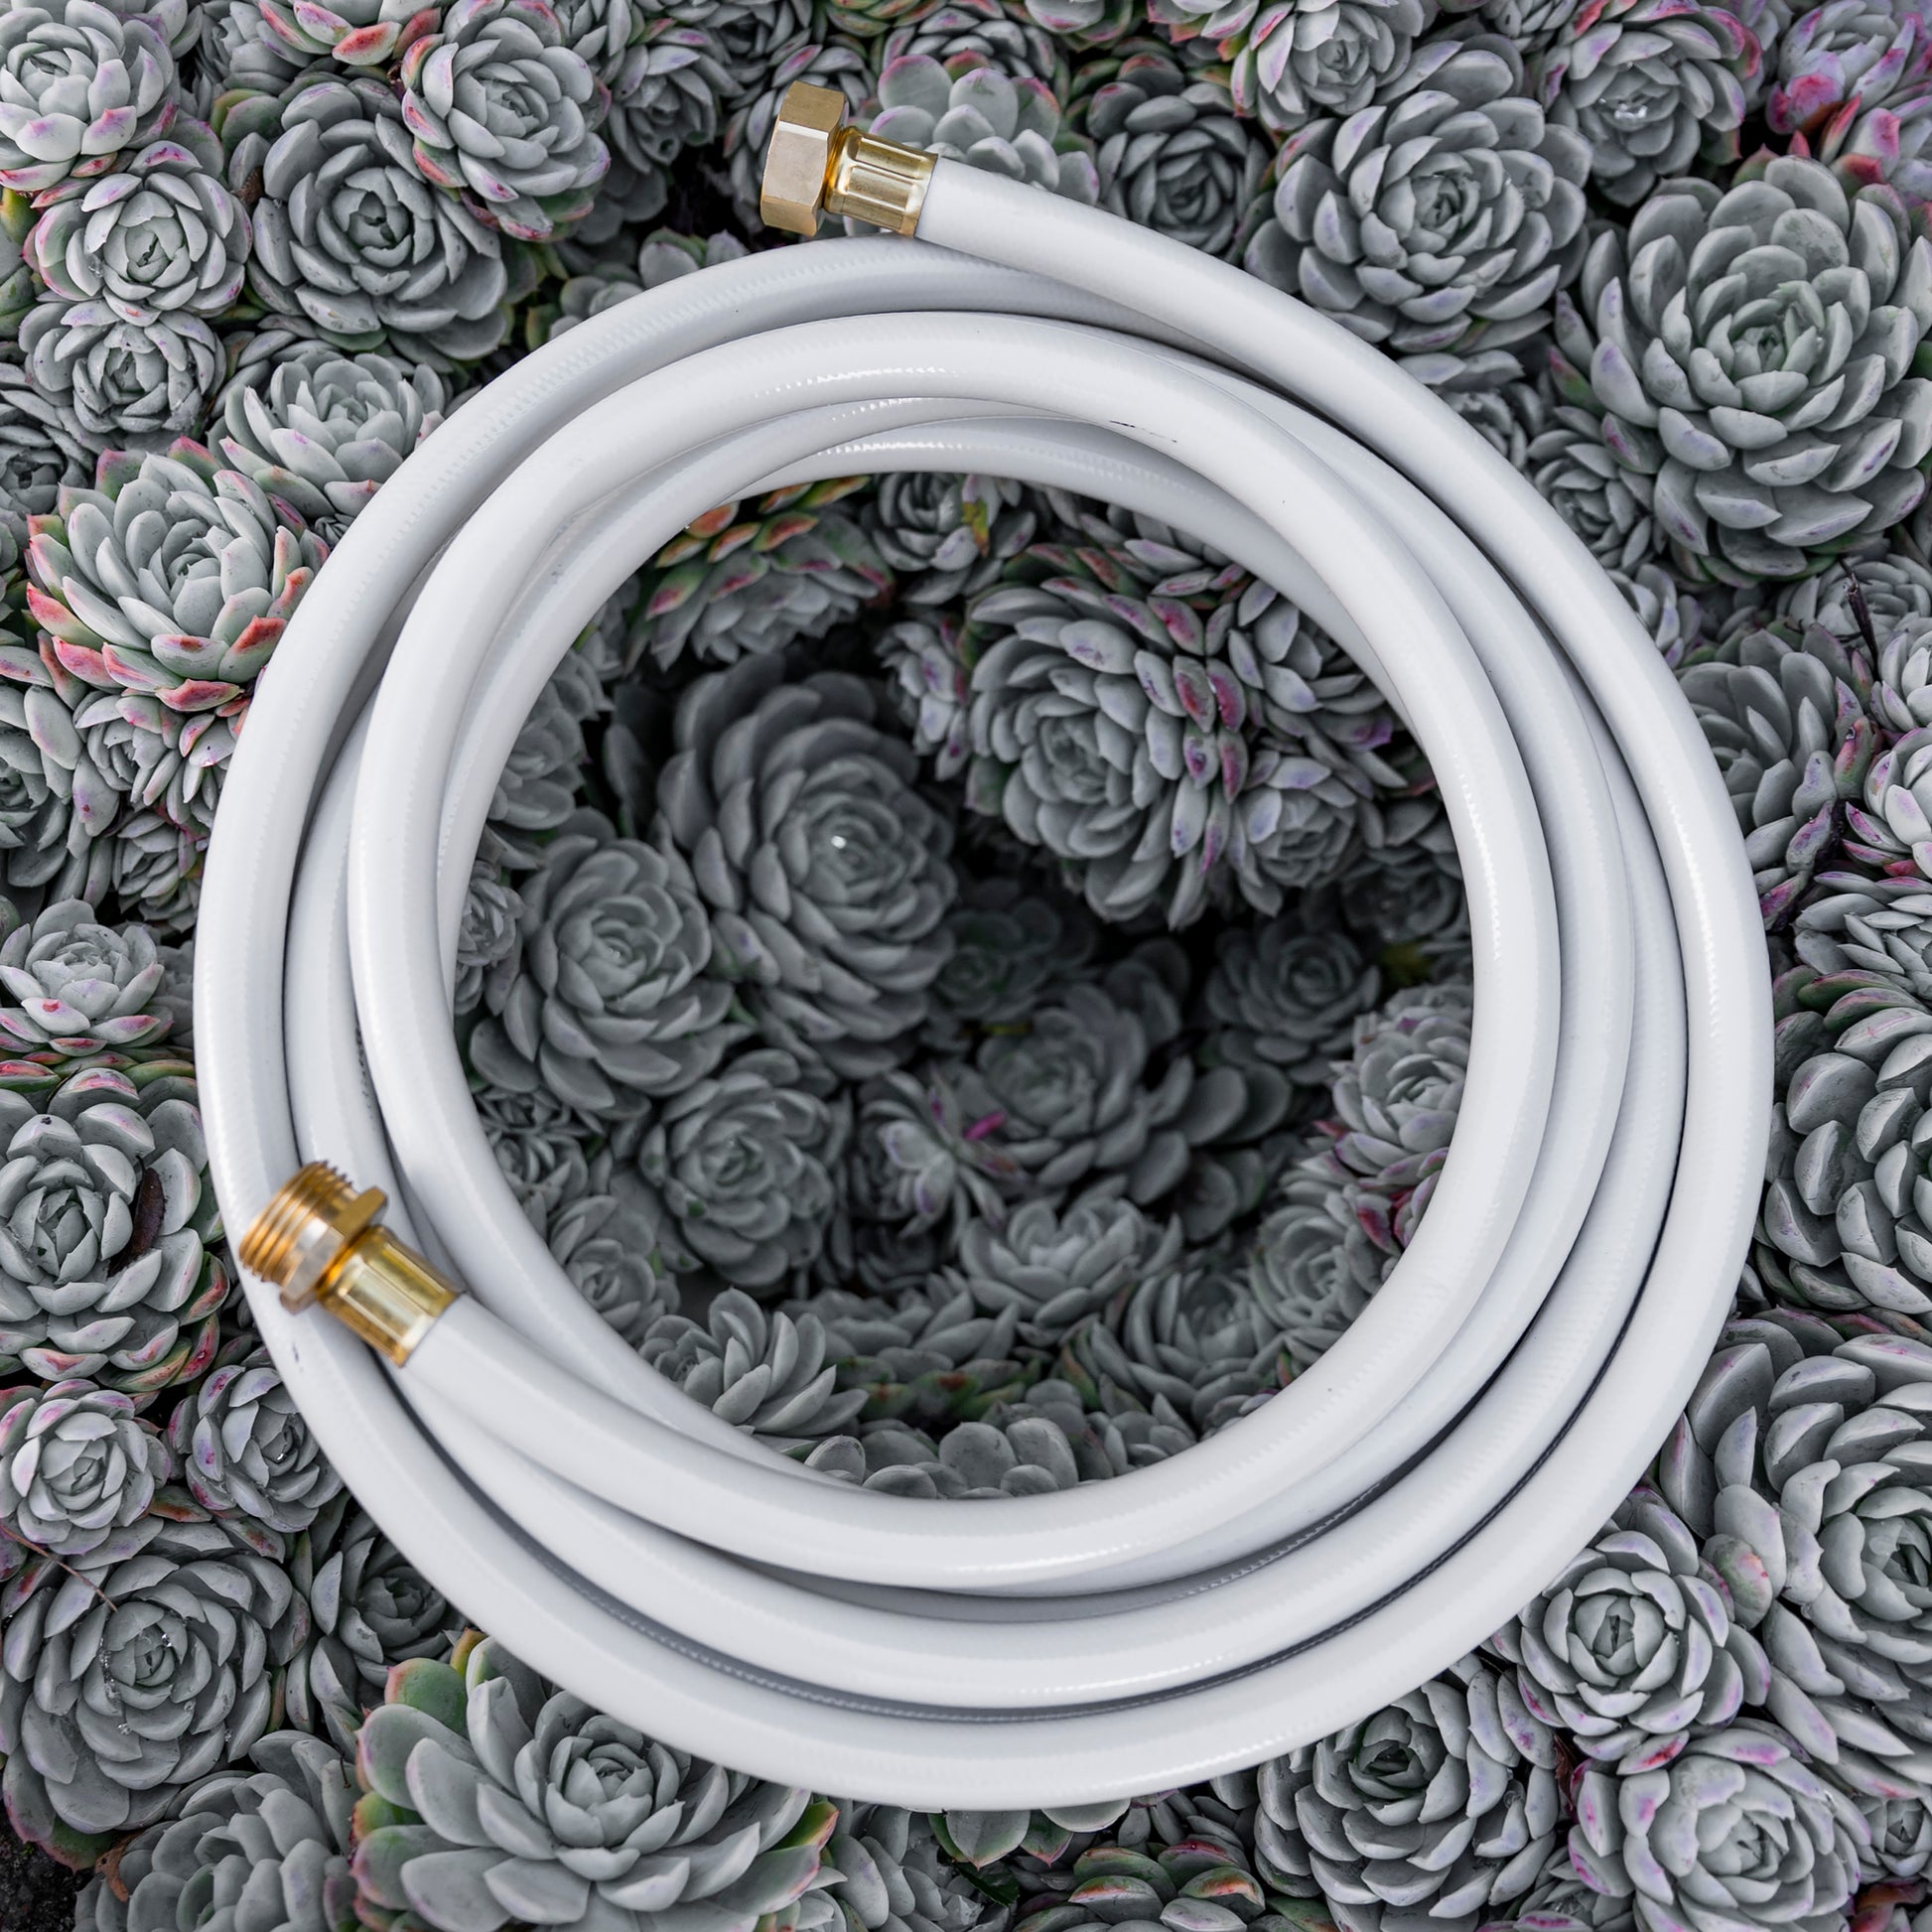 Beige 16ft US Leader Hose coiled up on top of bed of succulents